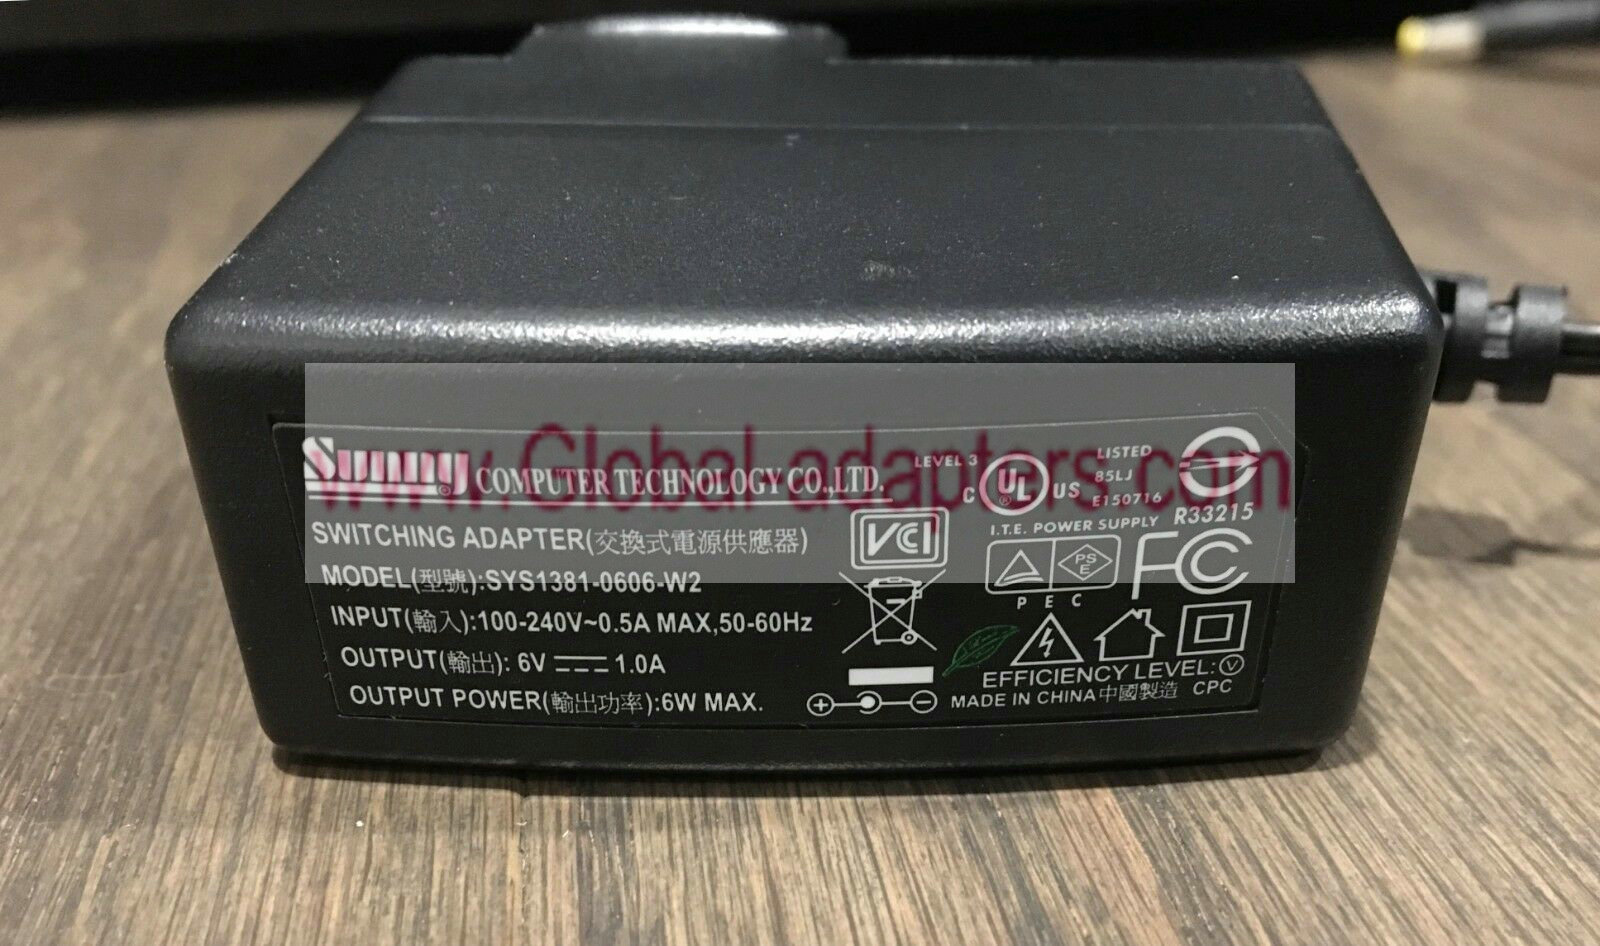 NEW Sunny SYS1381-0606-W2 Switching adapter For Akai Keyboard Controller - Click Image to Close